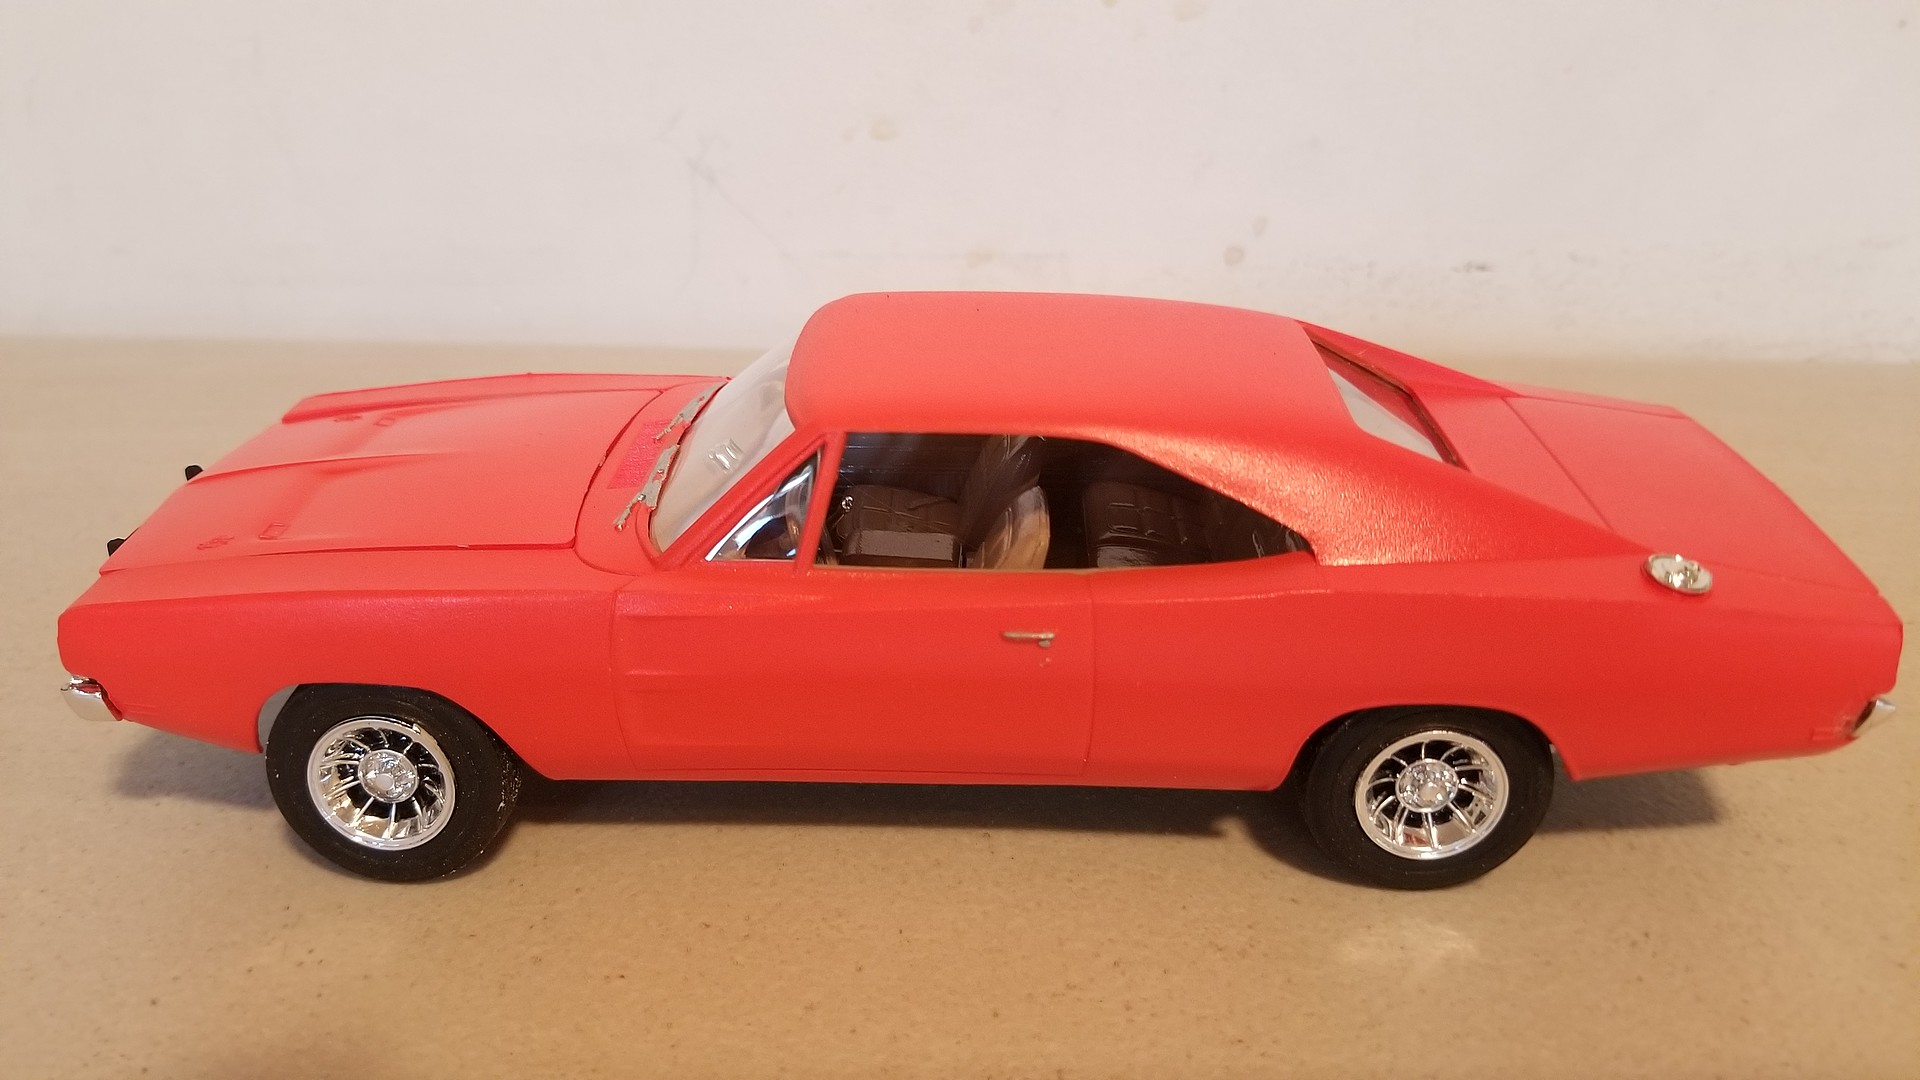 MPC 1969 Dodge Country Charger RT Plastic Model Car Mpc878 Mpc878m for sale online 